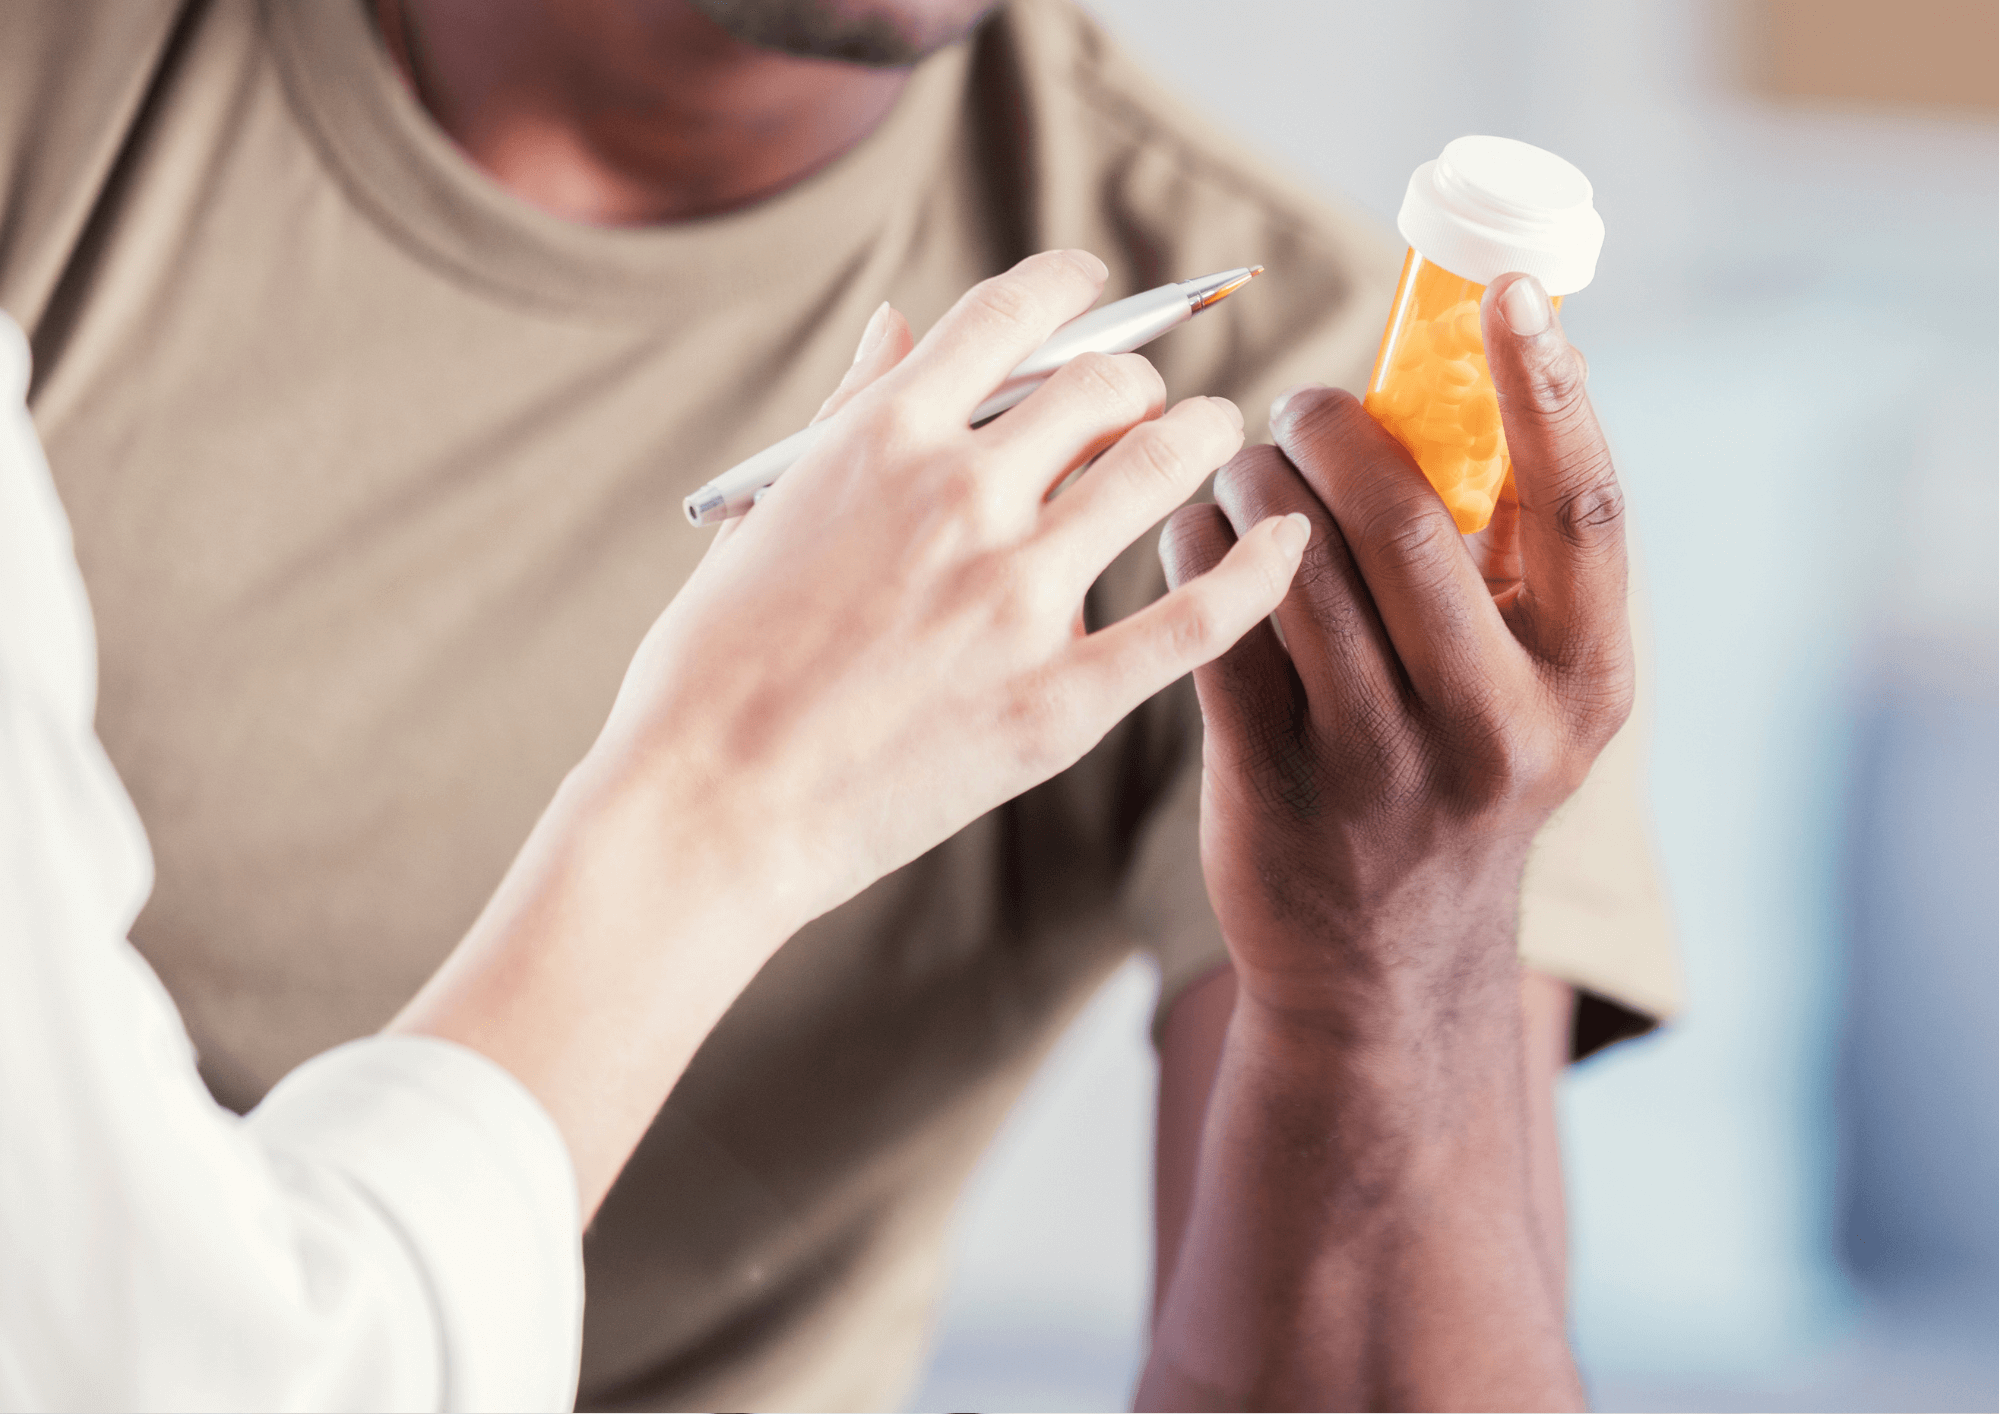 A Veteran holds a prescription bill bottle while a physician points at the label.